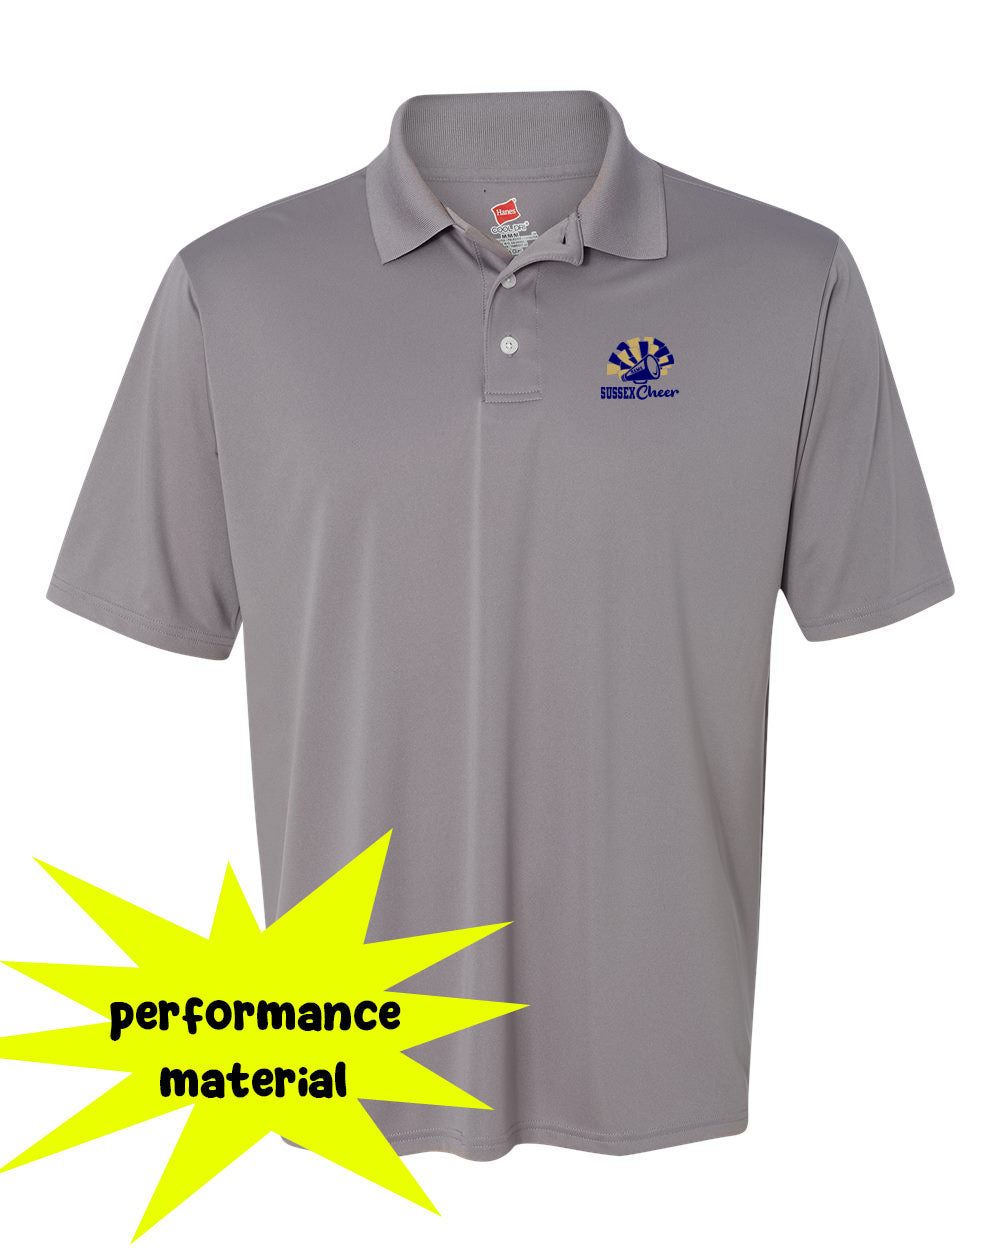 Sussex Middle Cheer Performance Material Polo T-Shirt Design 2